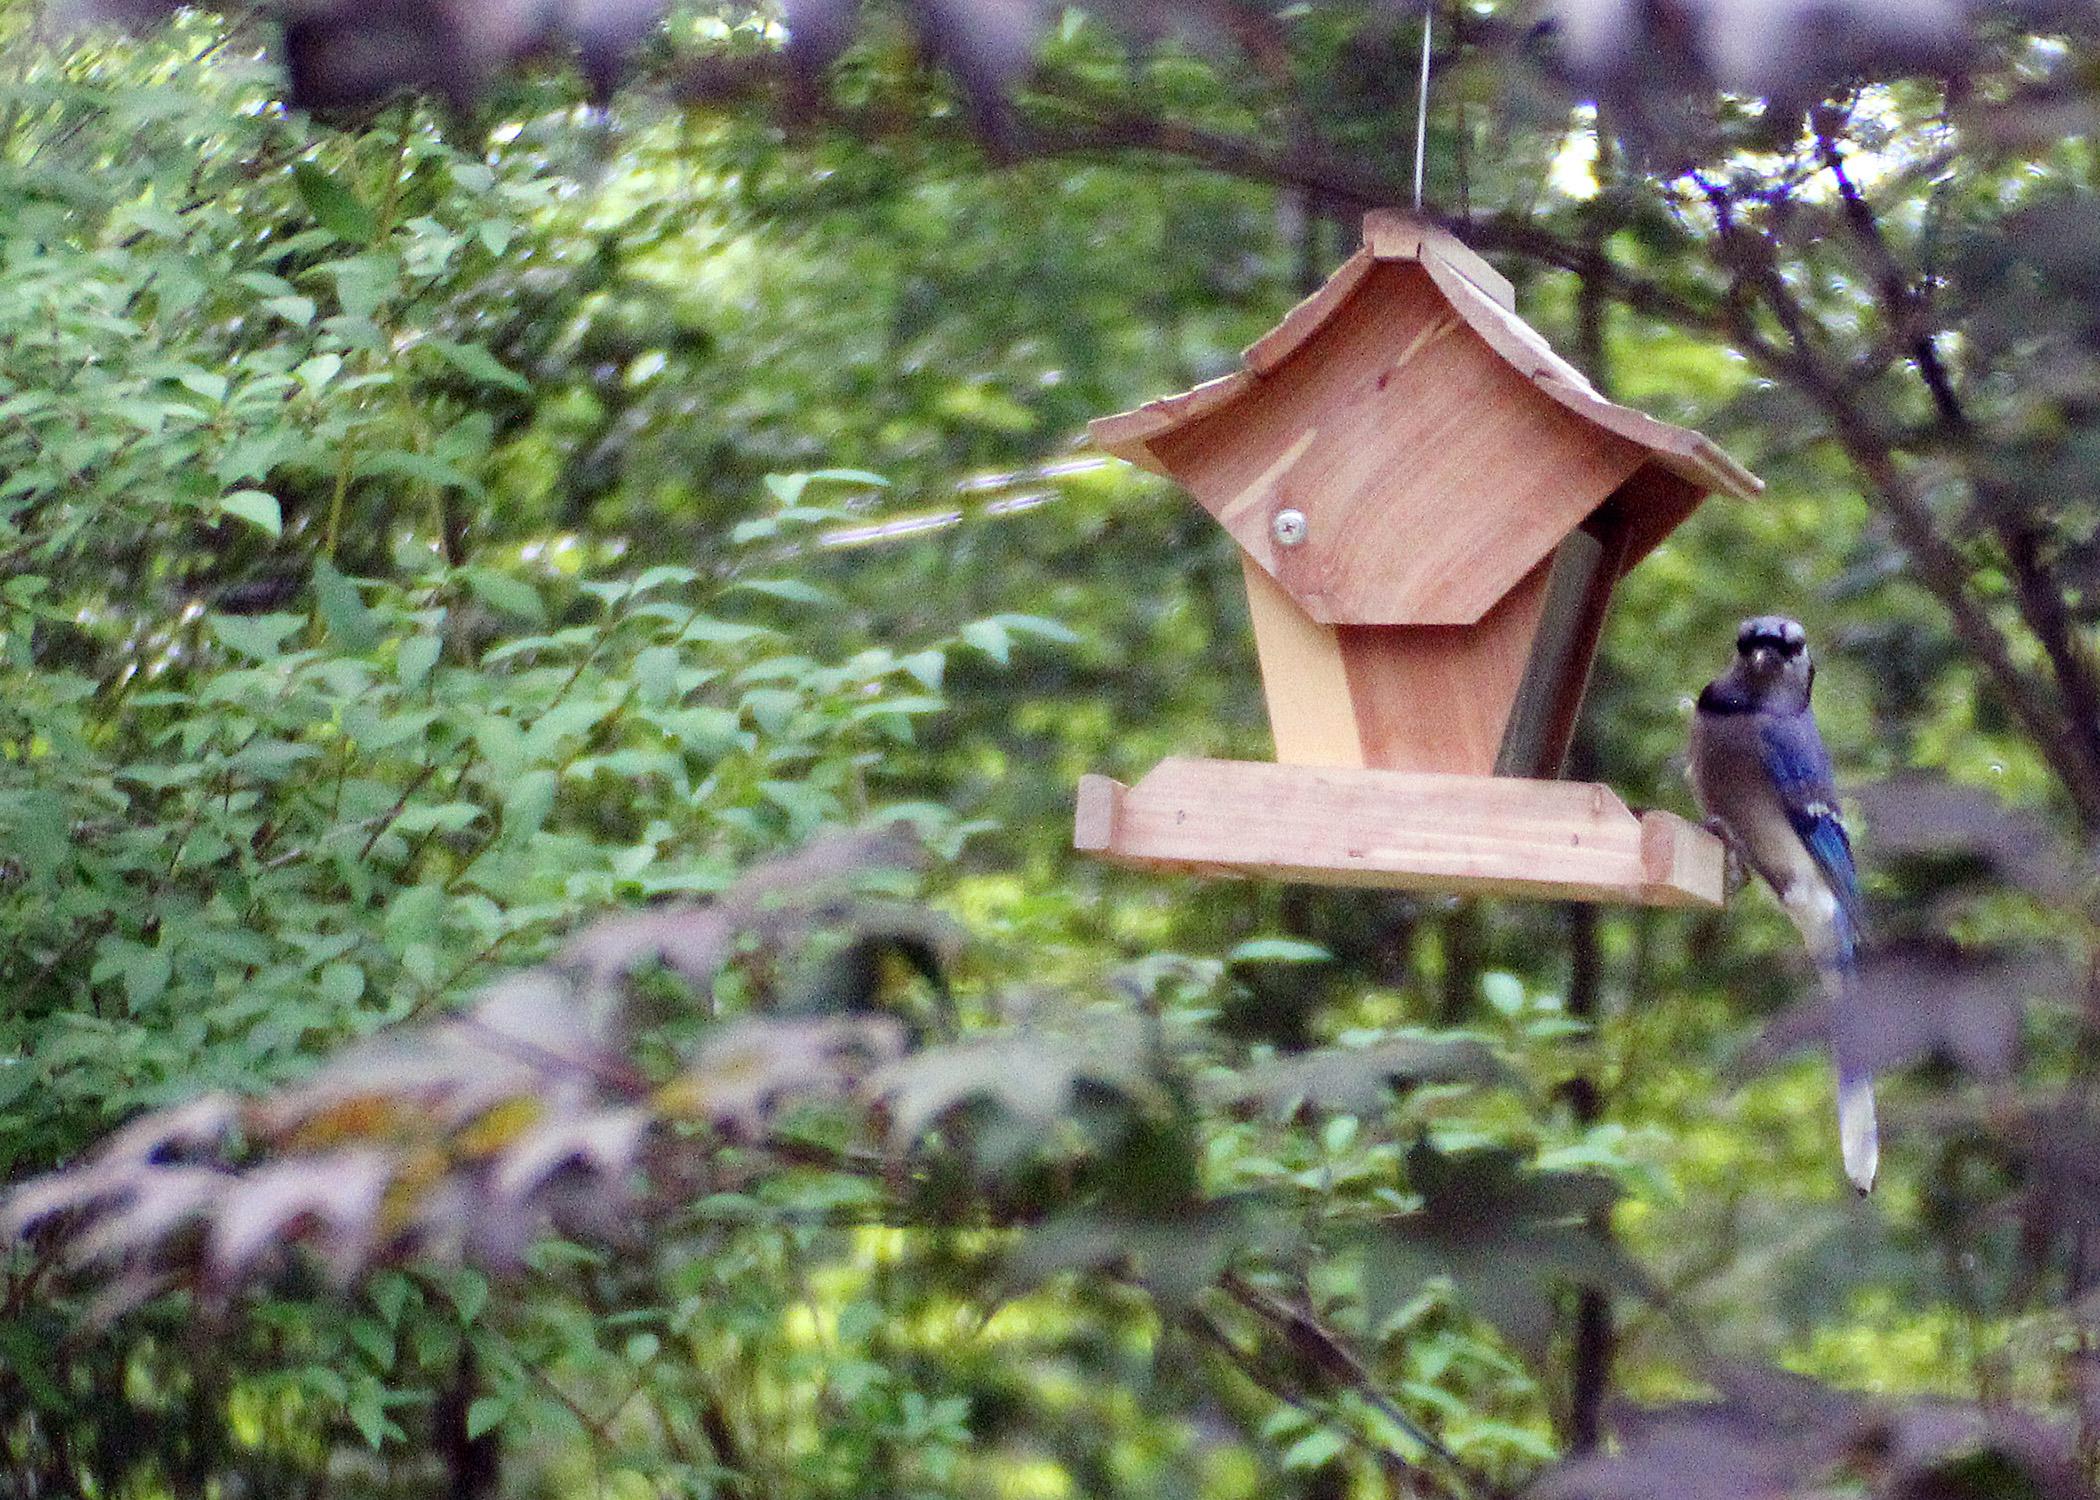 Consistently providing nutritious seeds and nuts to songbirds in the wintertime can offer humans a closer view of these wild animals. (Photo by Marina Denny)